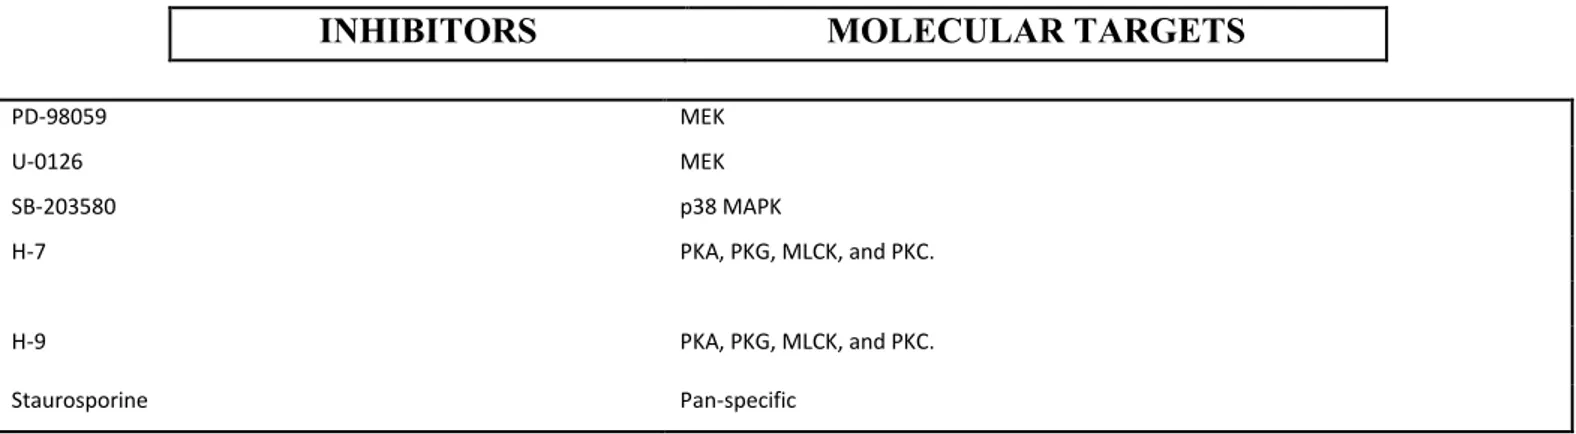 Table 1 shows the library compounds and their corresponding molecular targets. 